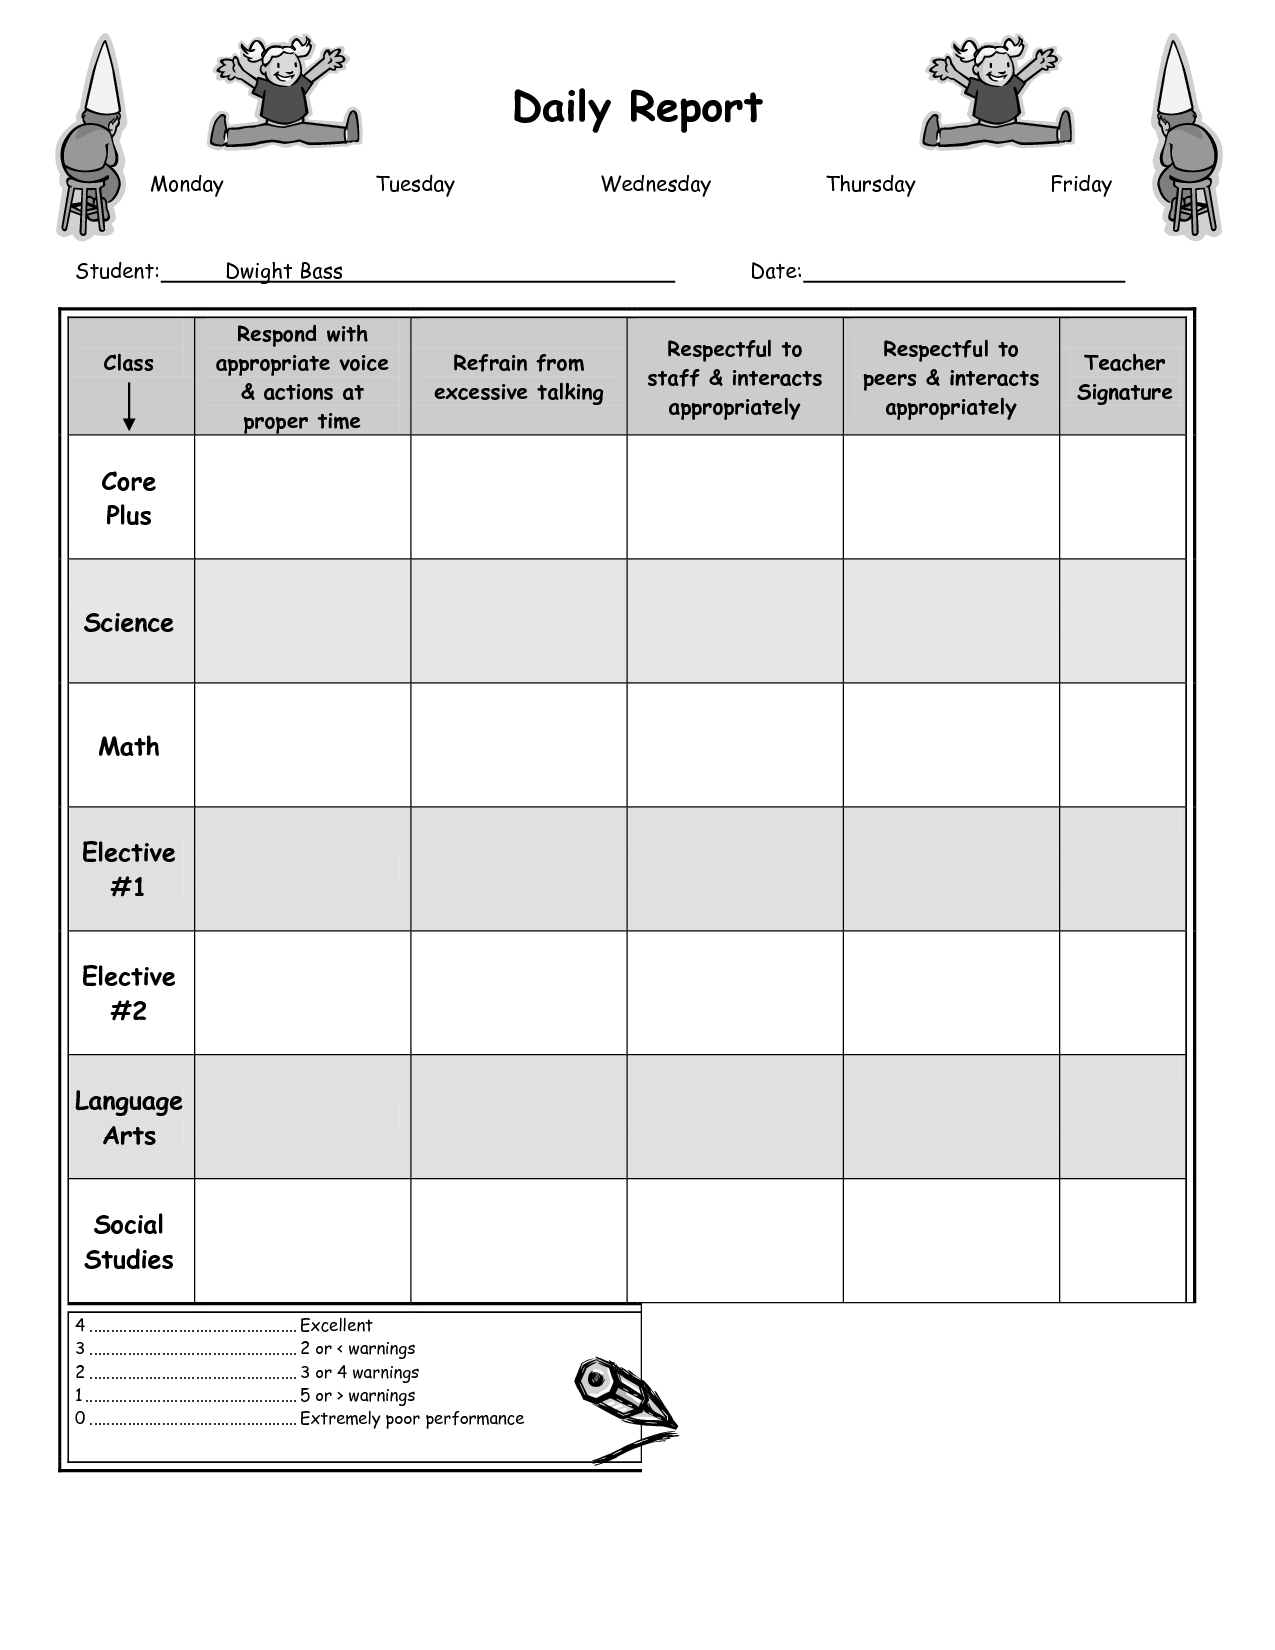 Daily Report Card Template For Adhd ] - Report Template Intended For Daily Report Card Template For Adhd